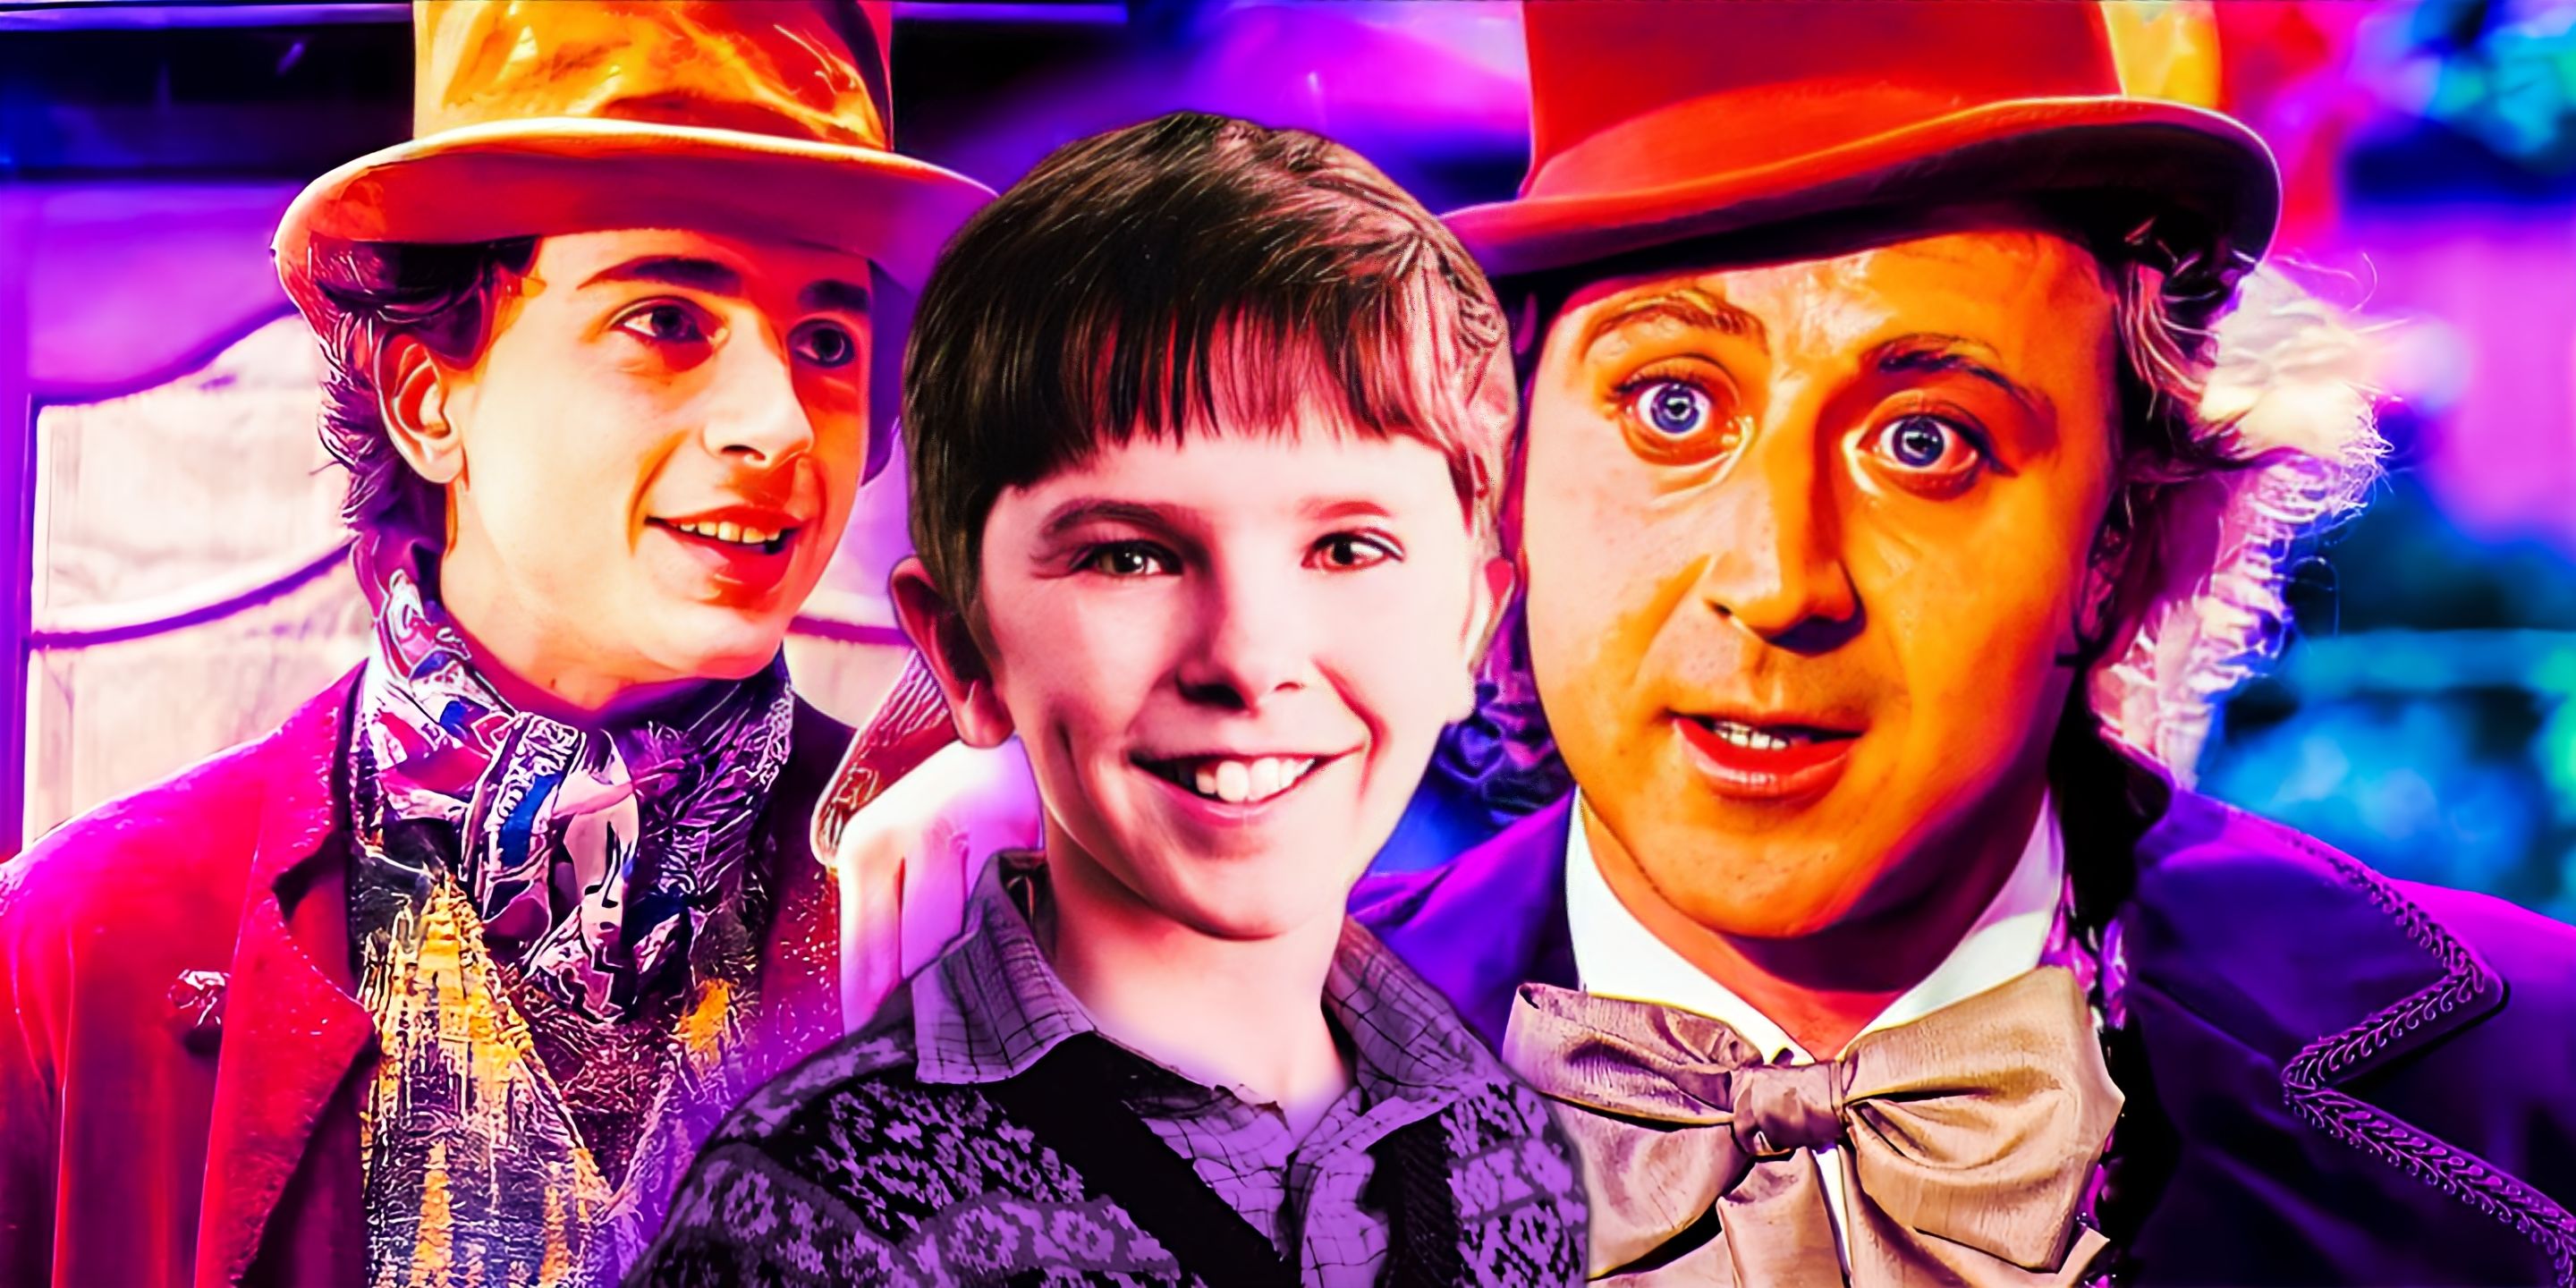 Wonka Breaks 1 Major Theme From The Wilder & Depp Movies (& Makes Willy Wonka So Much Better)